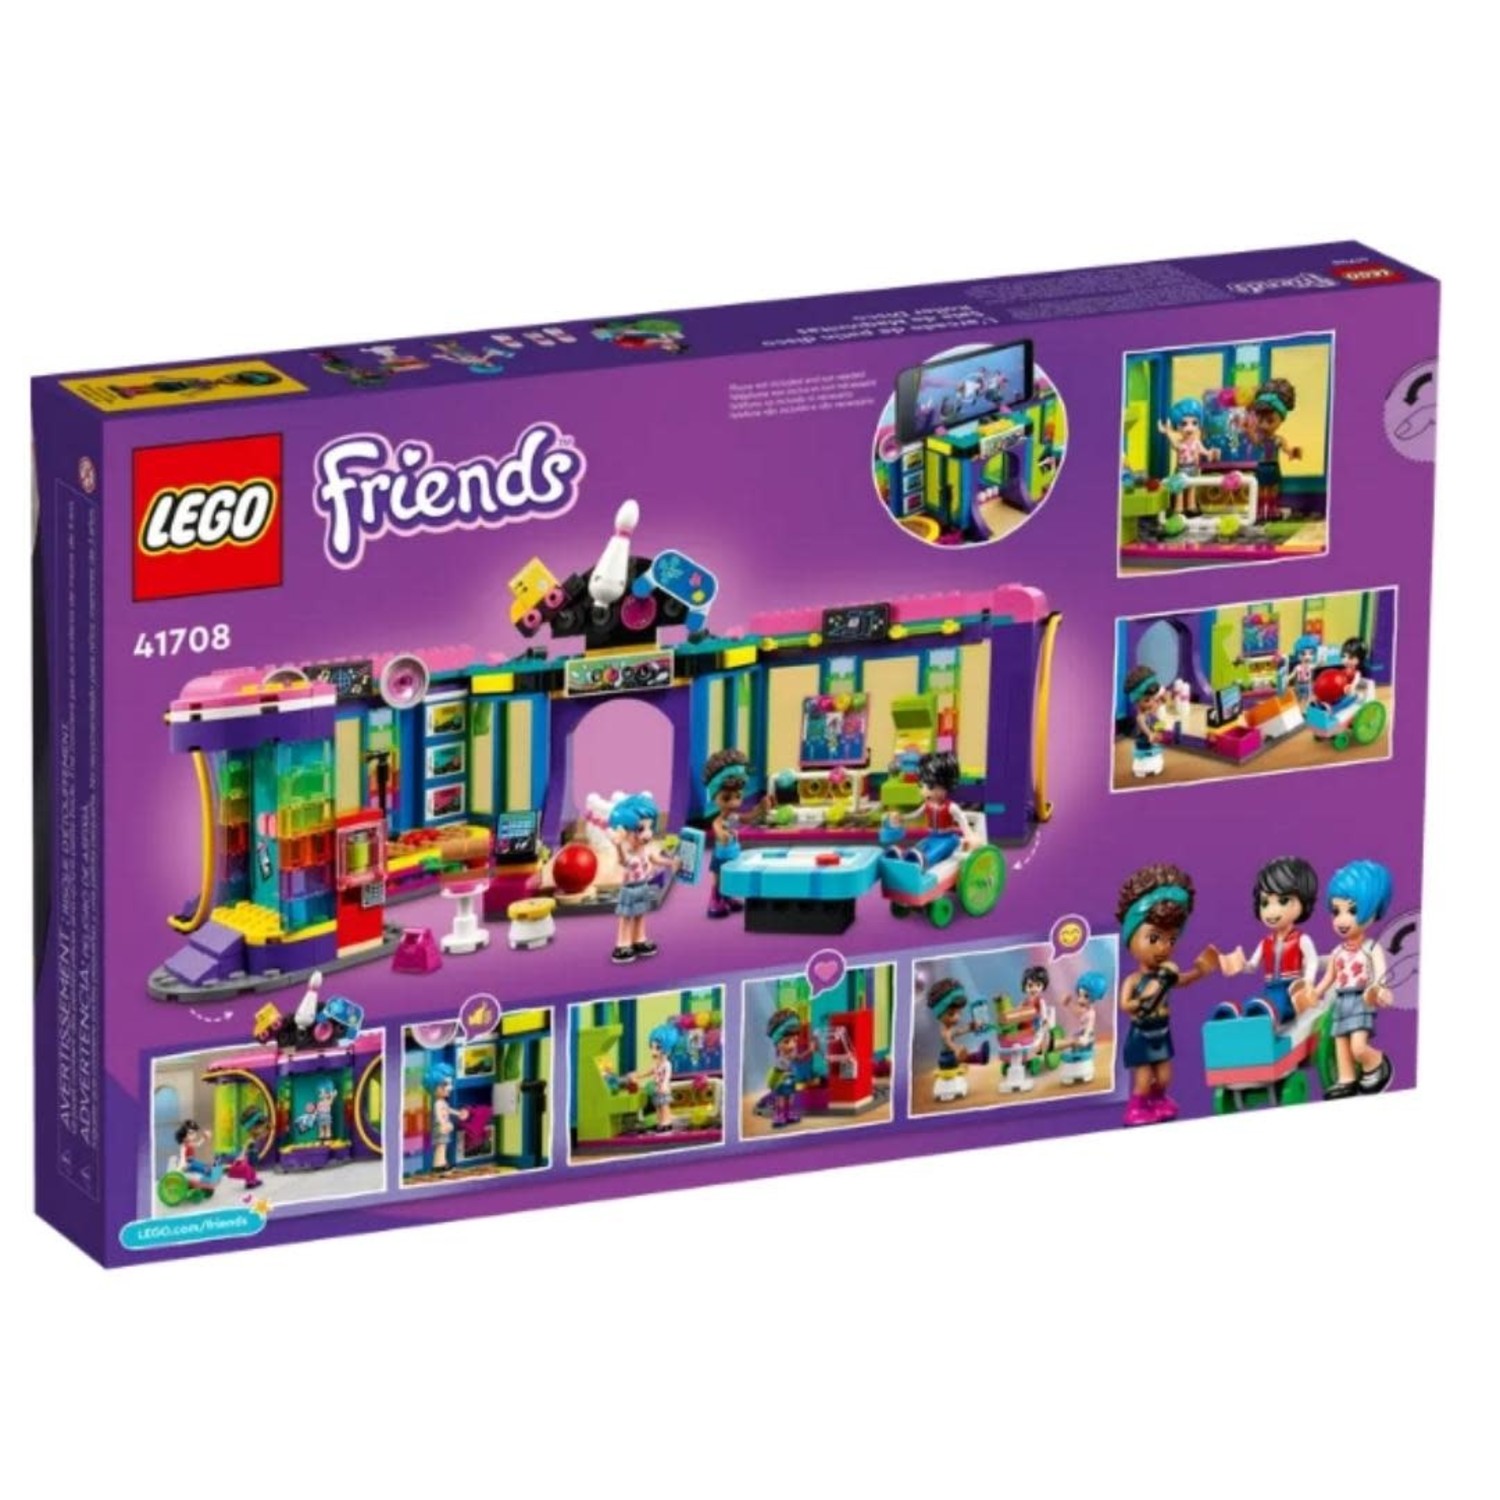 Roller Disco Arcade LEGO Friends - Mudpuddles Toys and Books